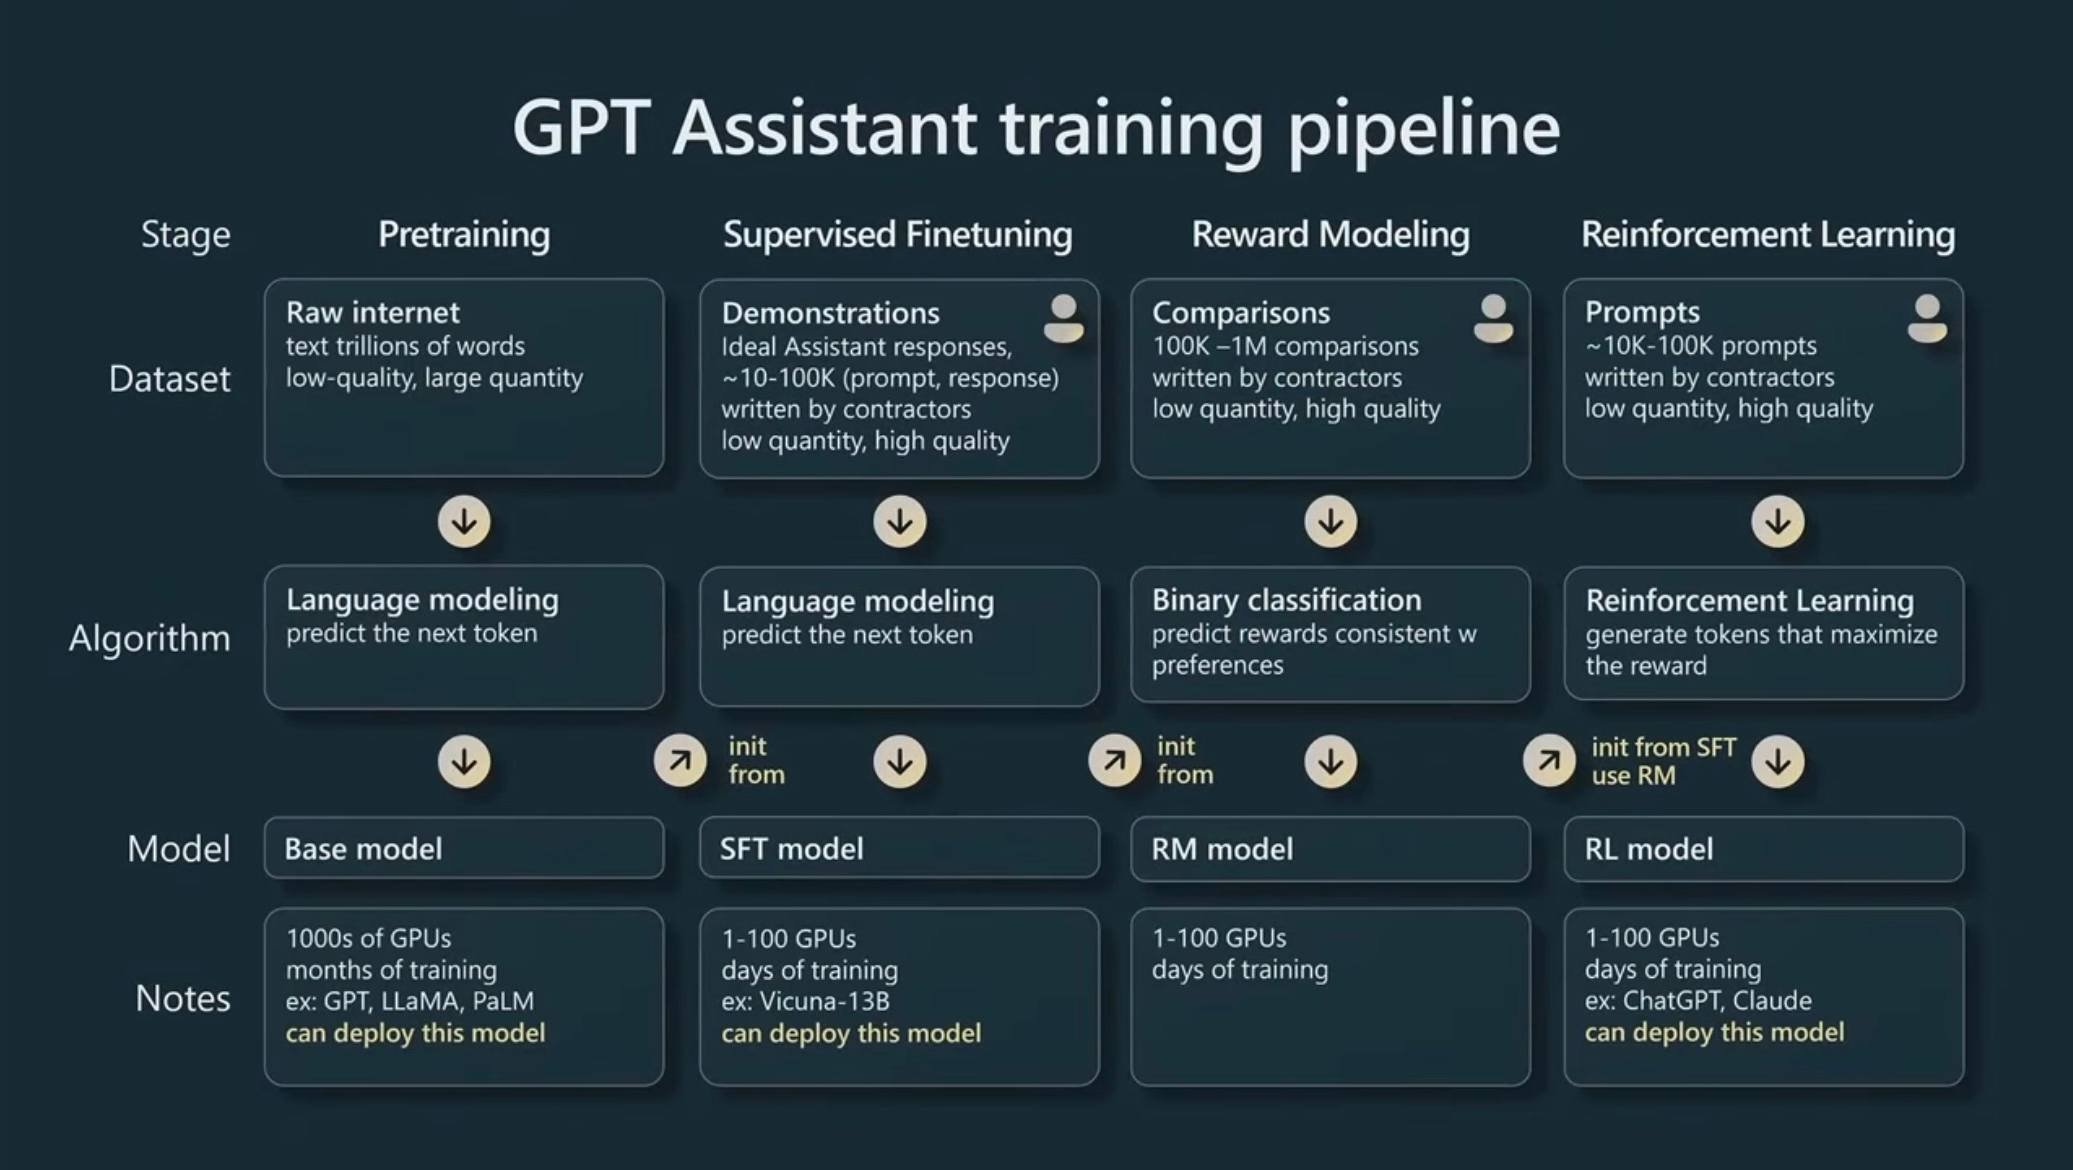 gpt-assistant-training-pipeline-IMG 5655